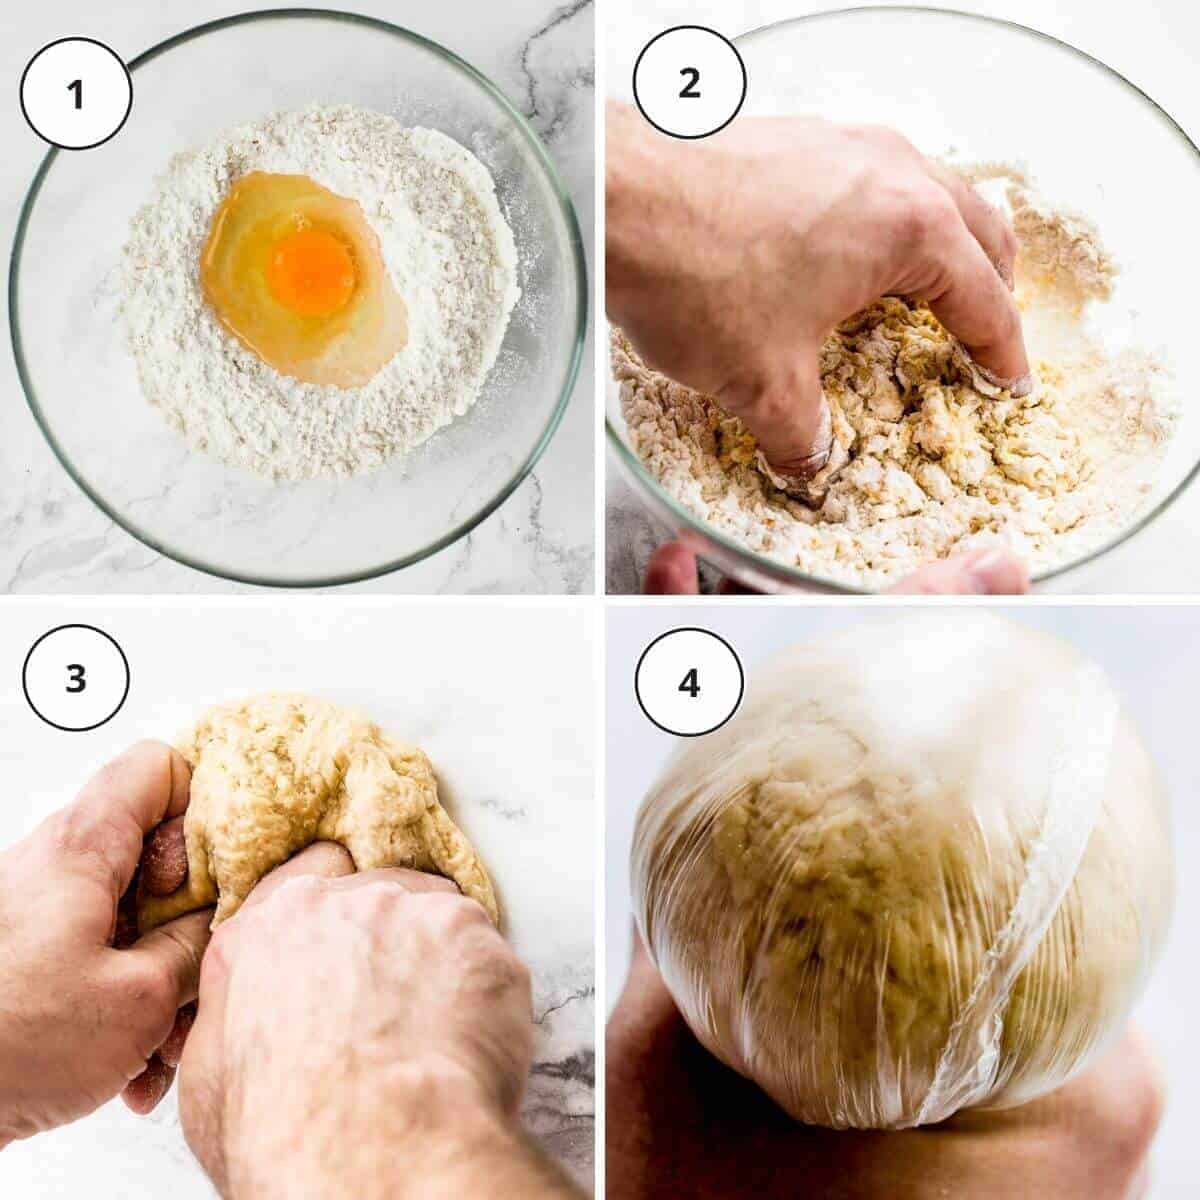 picture steps to mix pasta dough by hand.